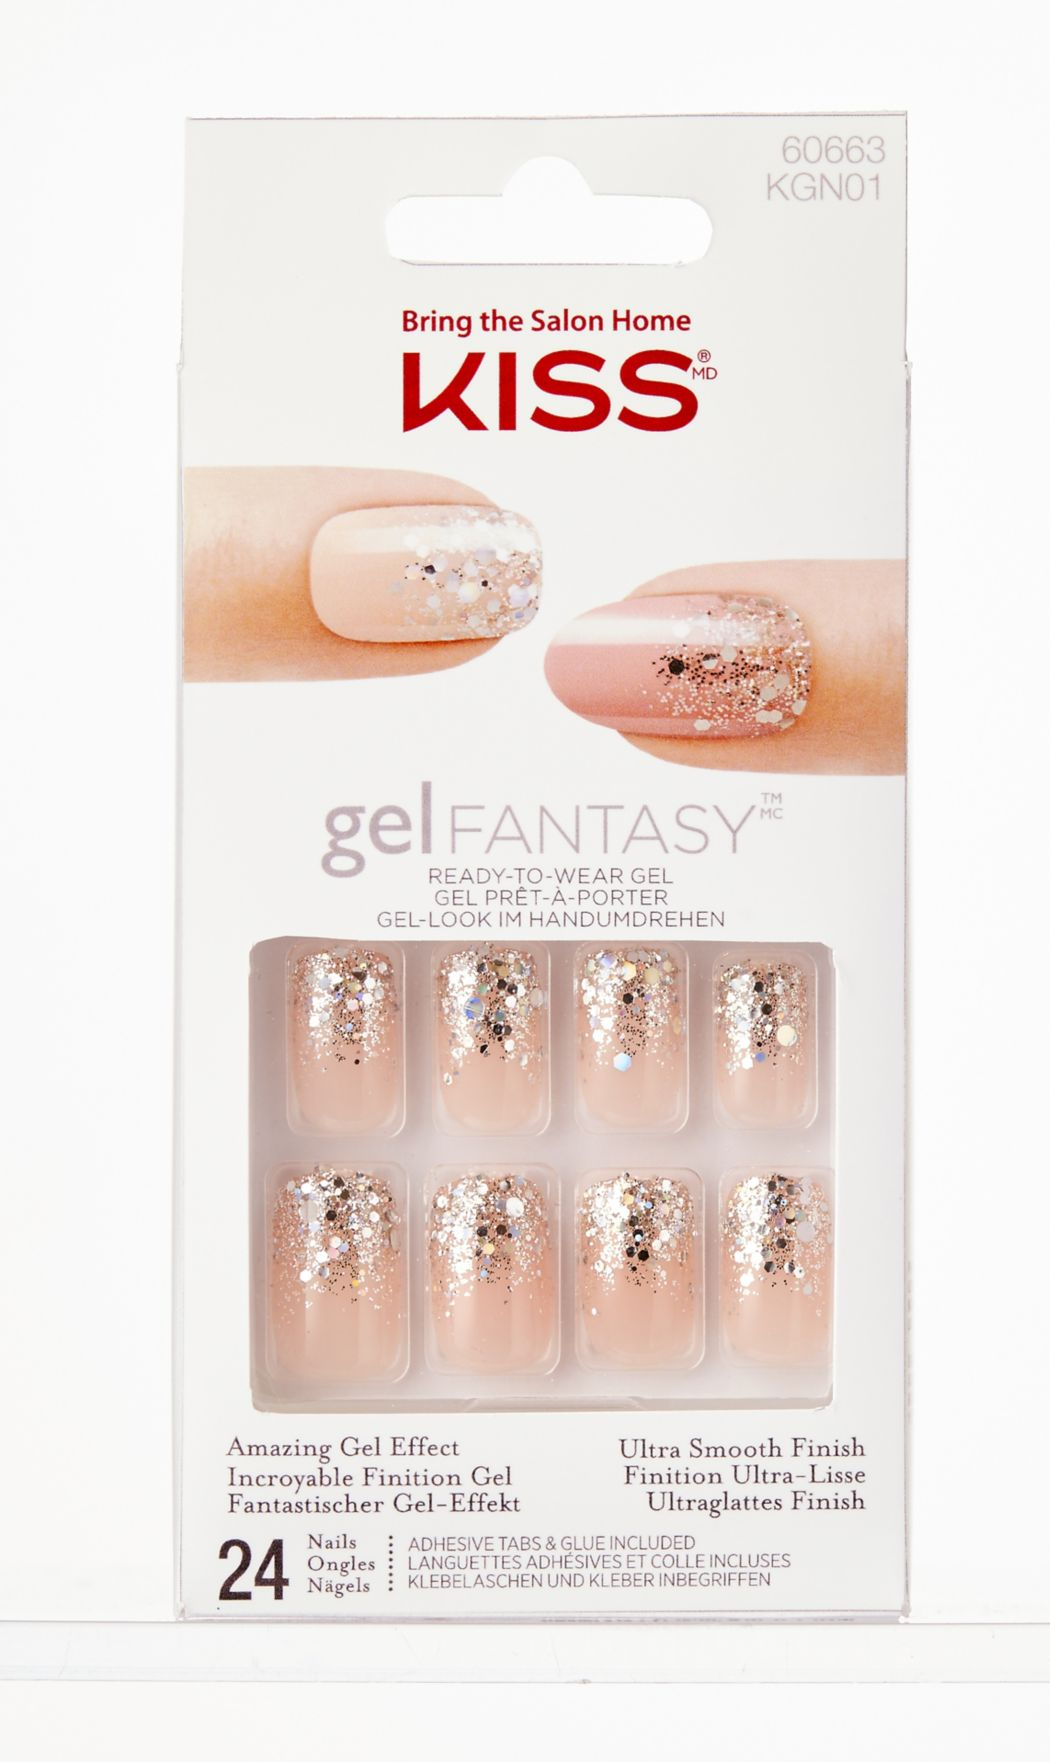 25.KISS Gel Fantasy Nails Fanciful €10.99, visit boots.ie